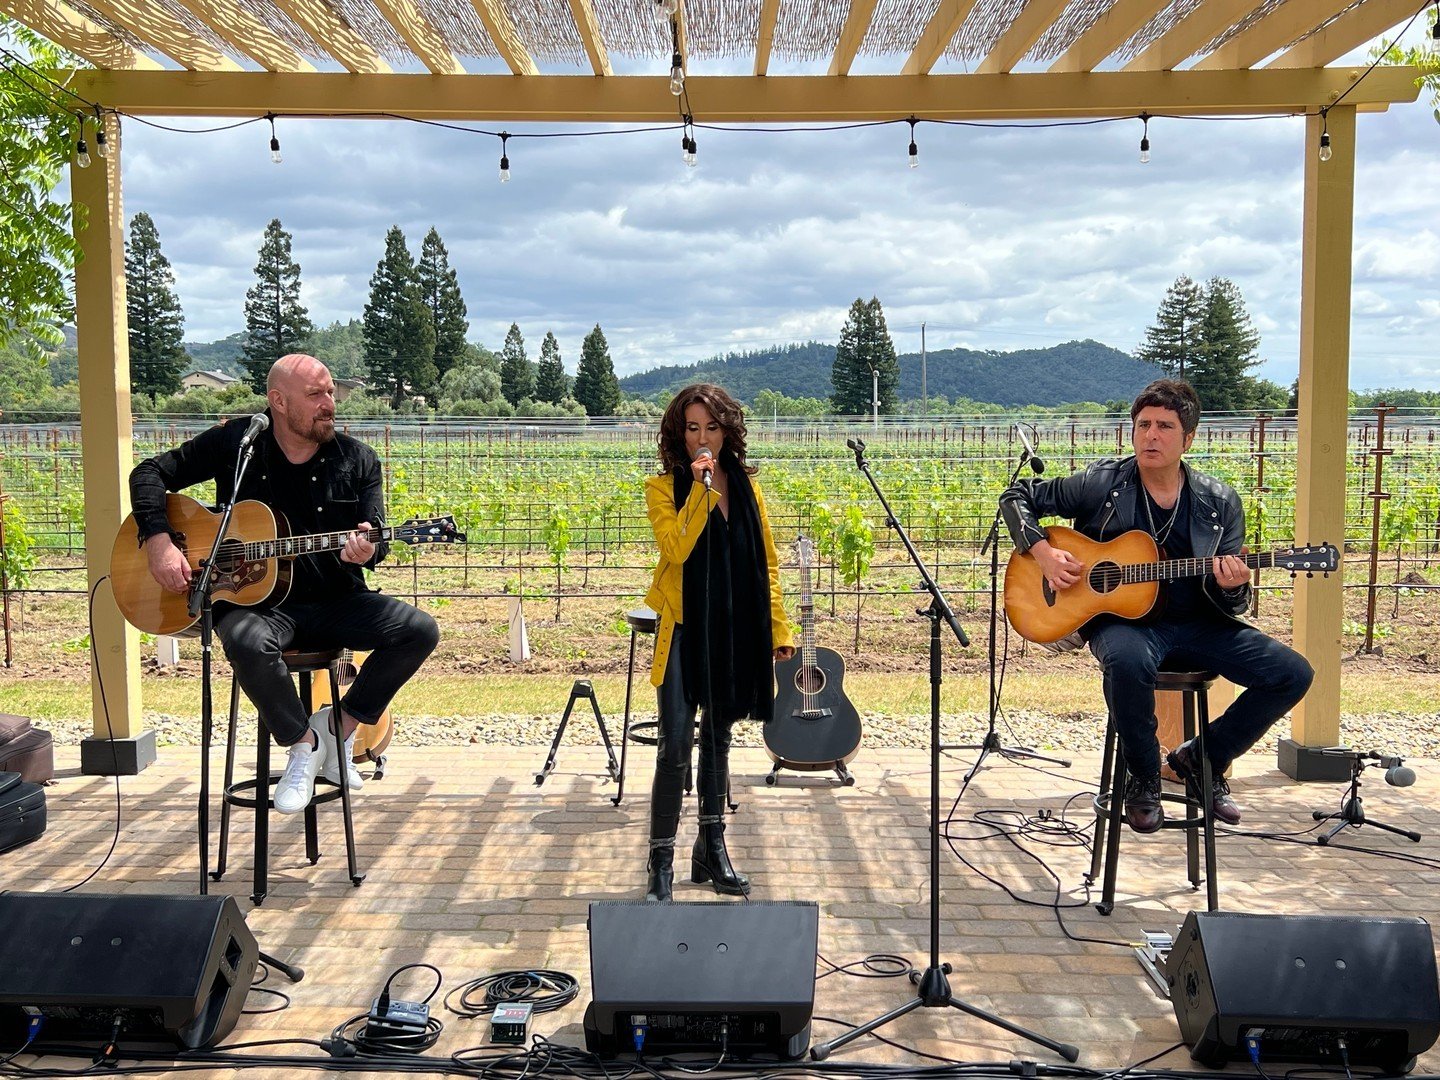 @LauraBryna at @goosecrosscellars for a special stripped down performance at @liveinthevineyard Goes Country!